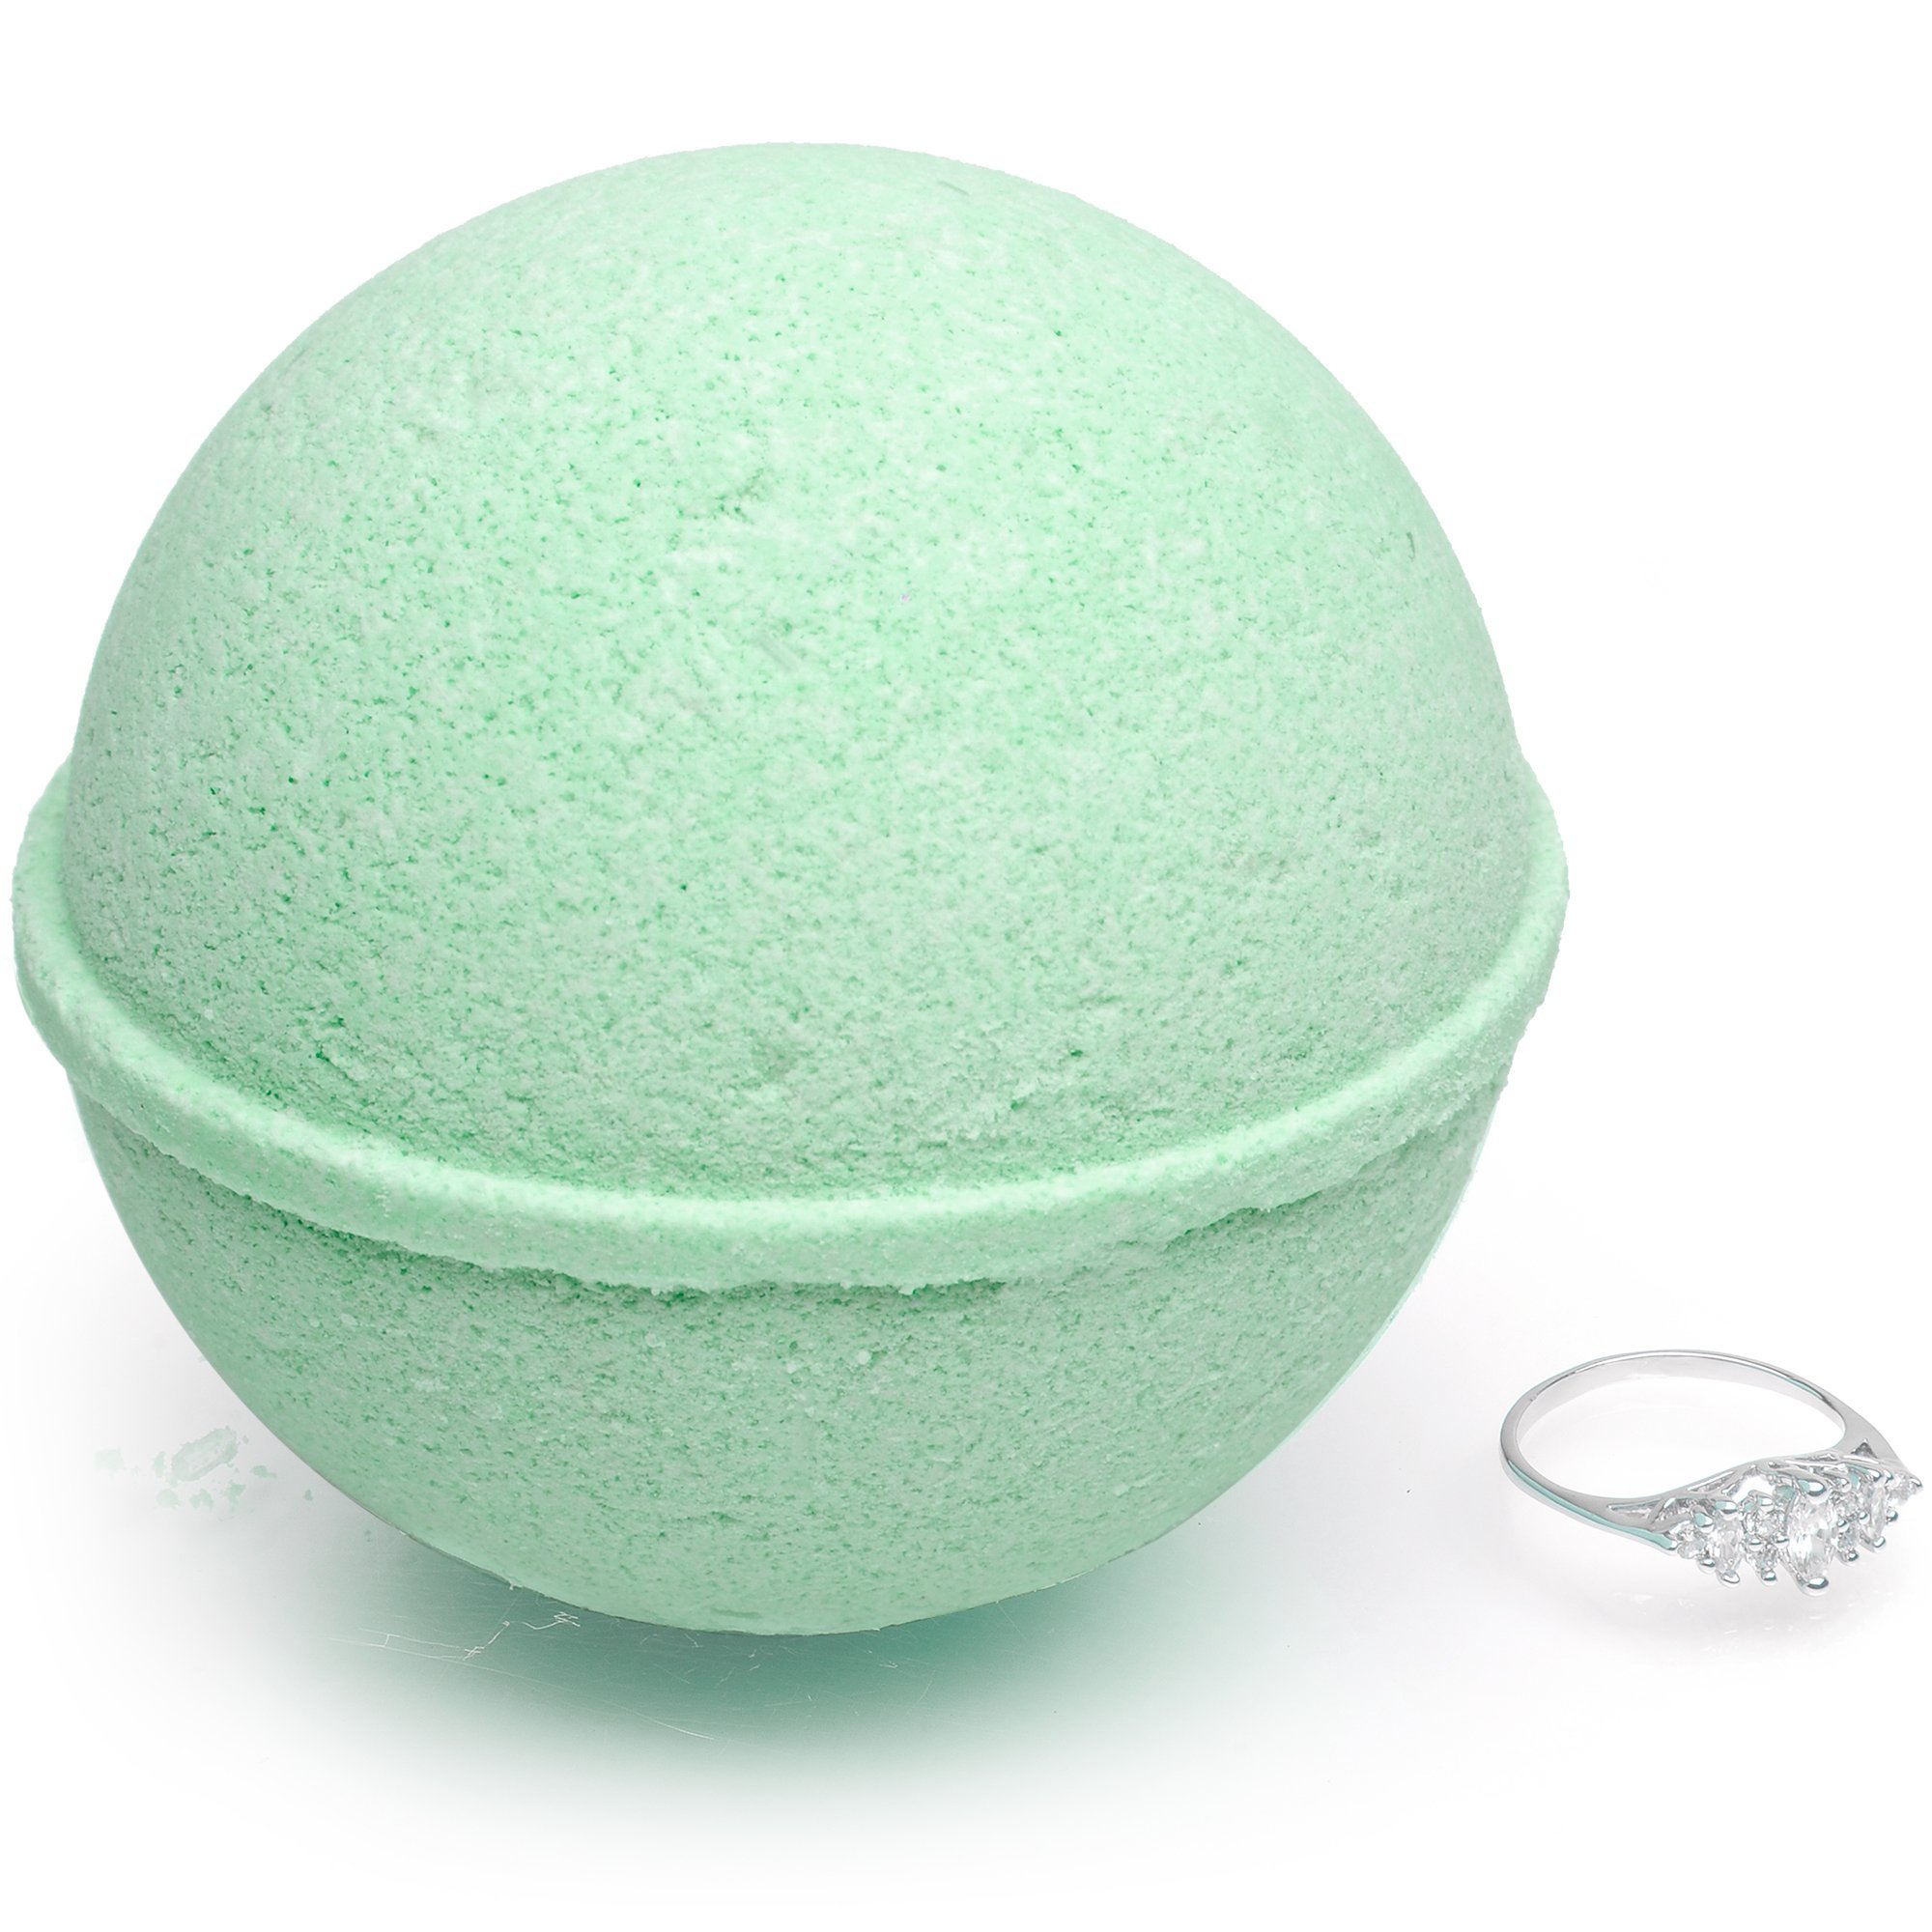 Jackpot Candles Bath Bomb with Ring Surprise Inside Mermaid Daydream Extra Large Made in USA - image 5 of 9